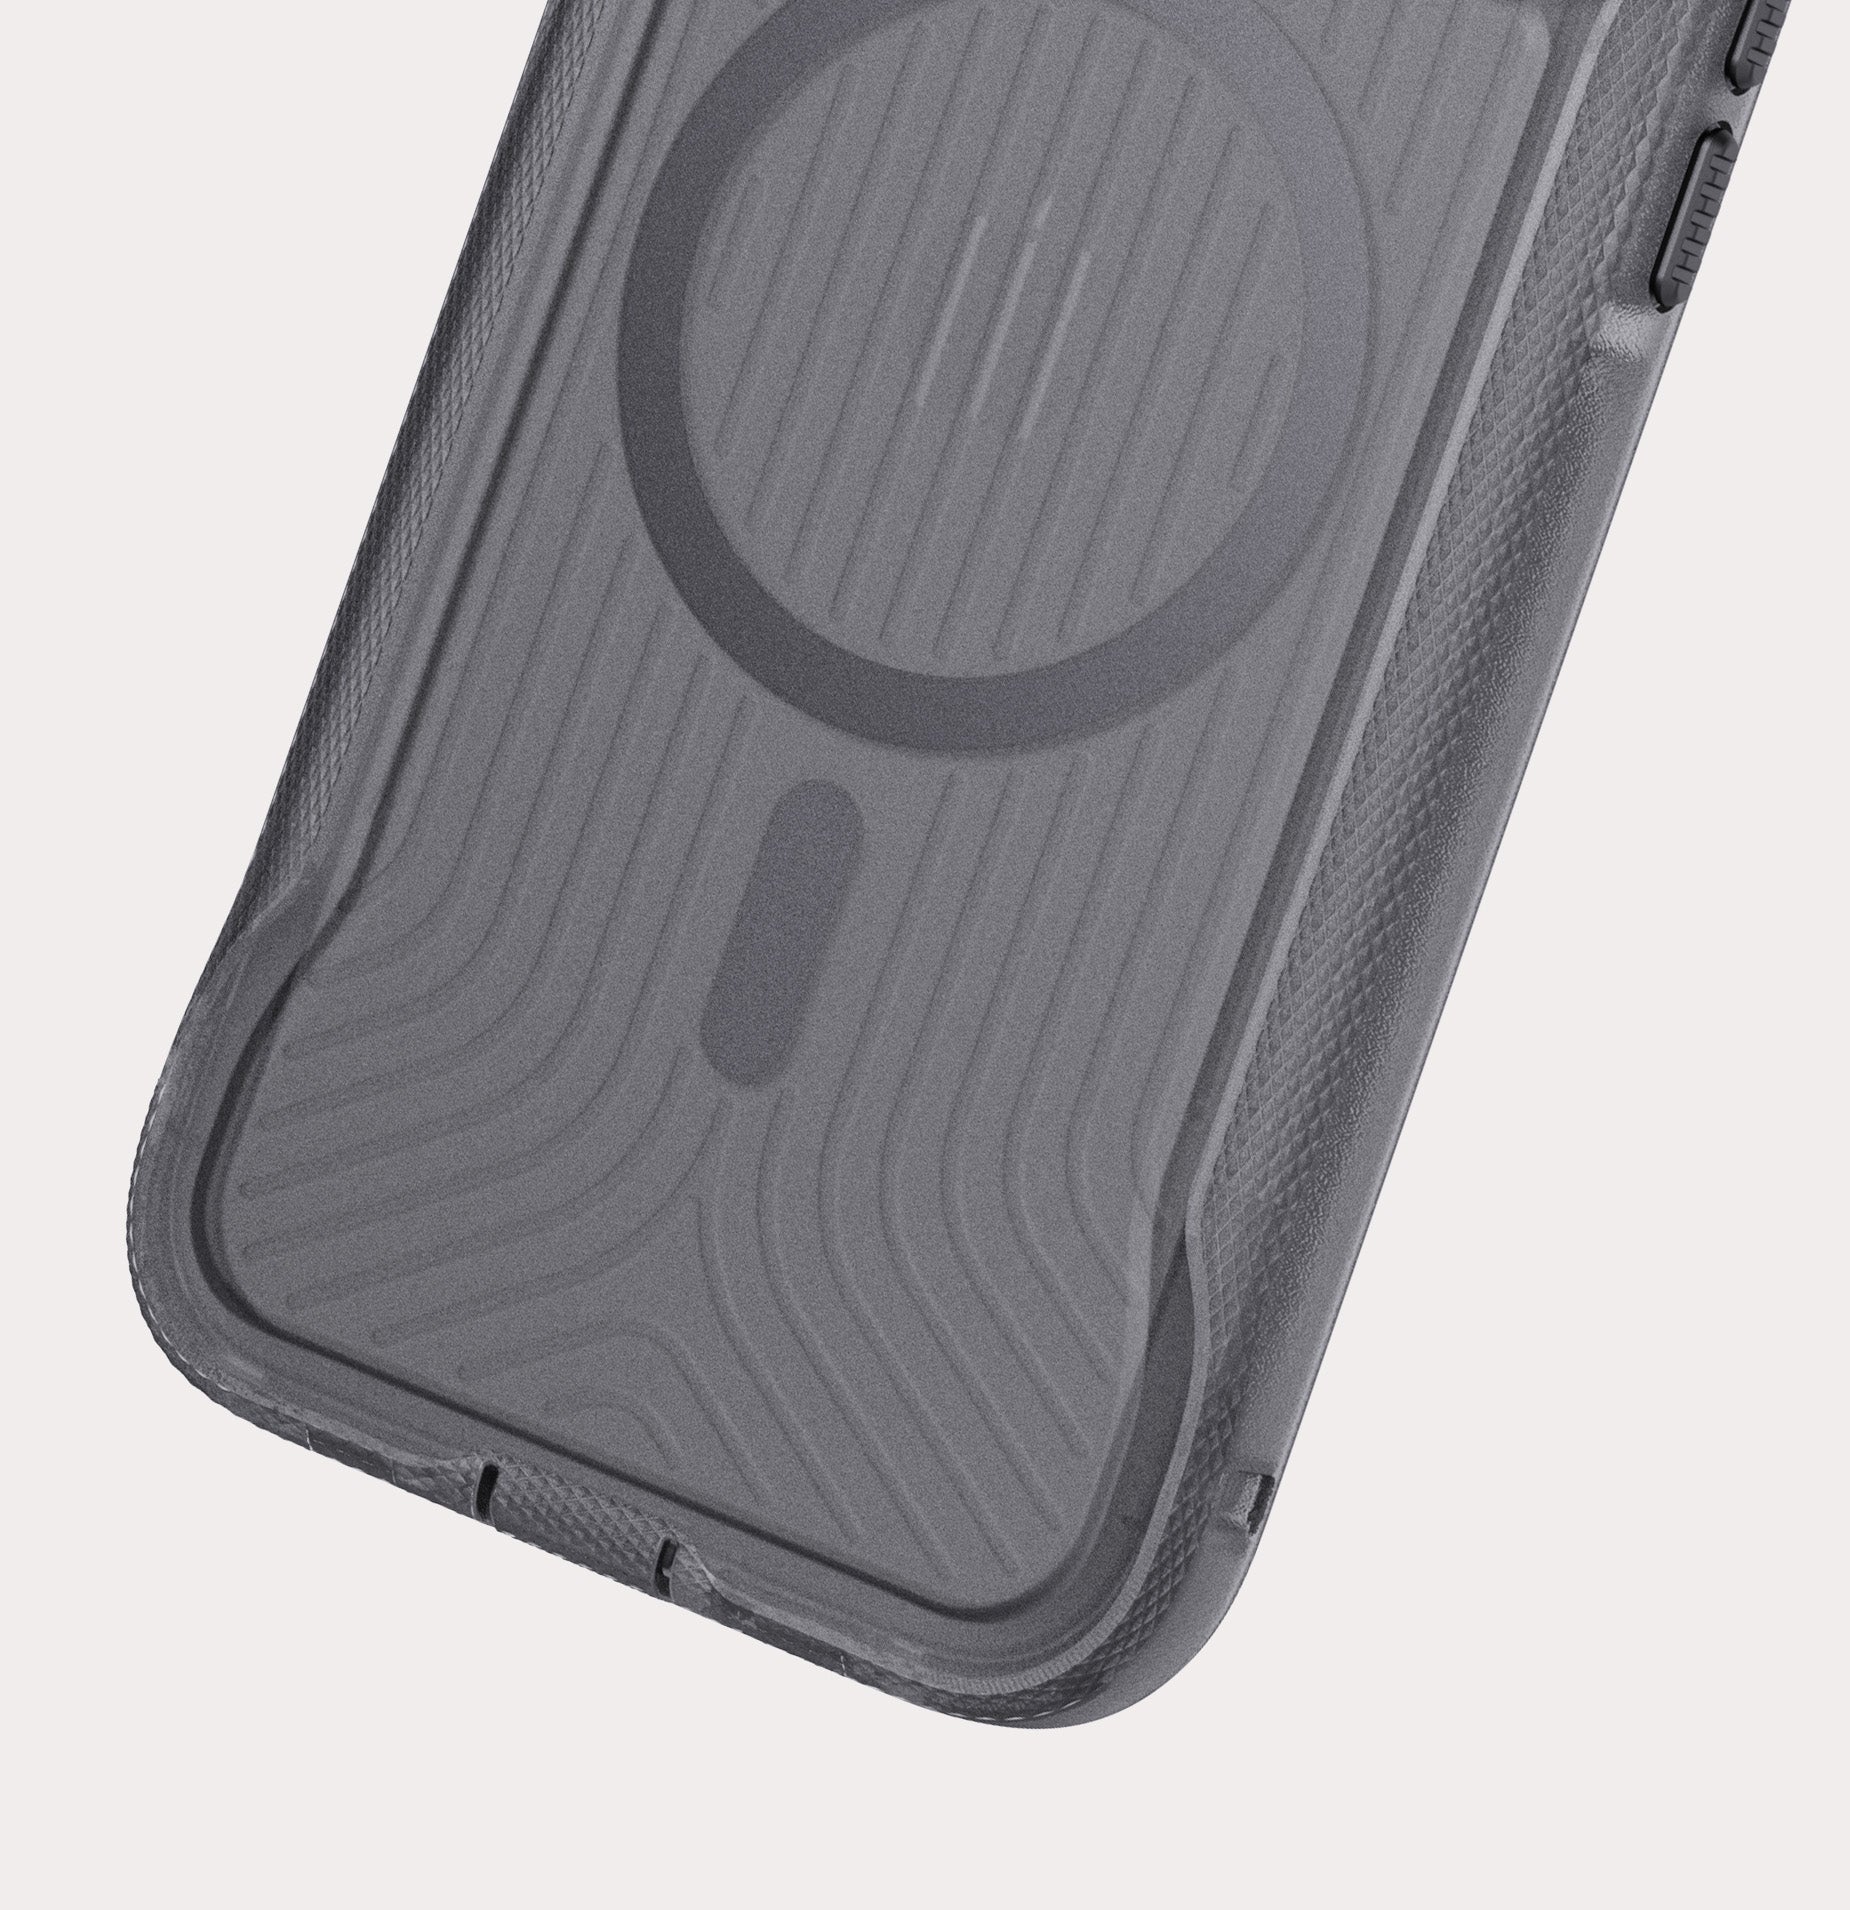 Evo Max - Apple iPhone 13 mini Case with Holster - Off Black